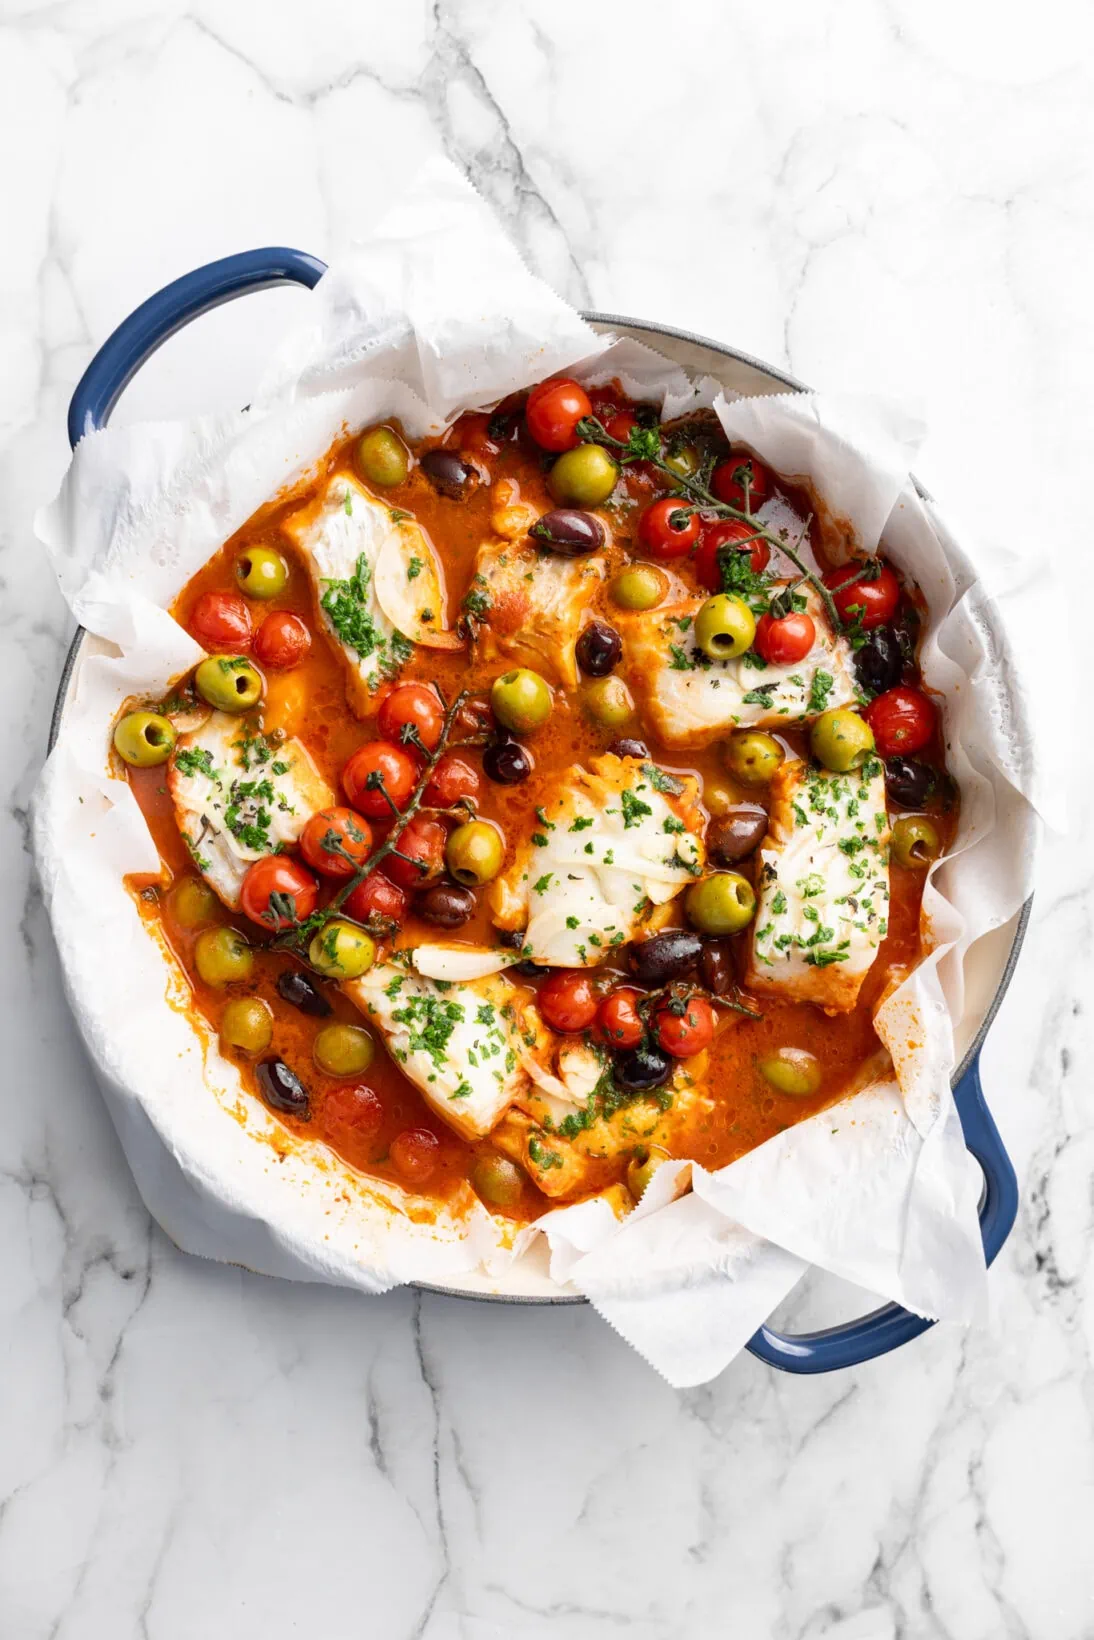 braiser with mediterranean fish - thick chunks of cod in a herb simmered red sauce with olives and tomatoes.